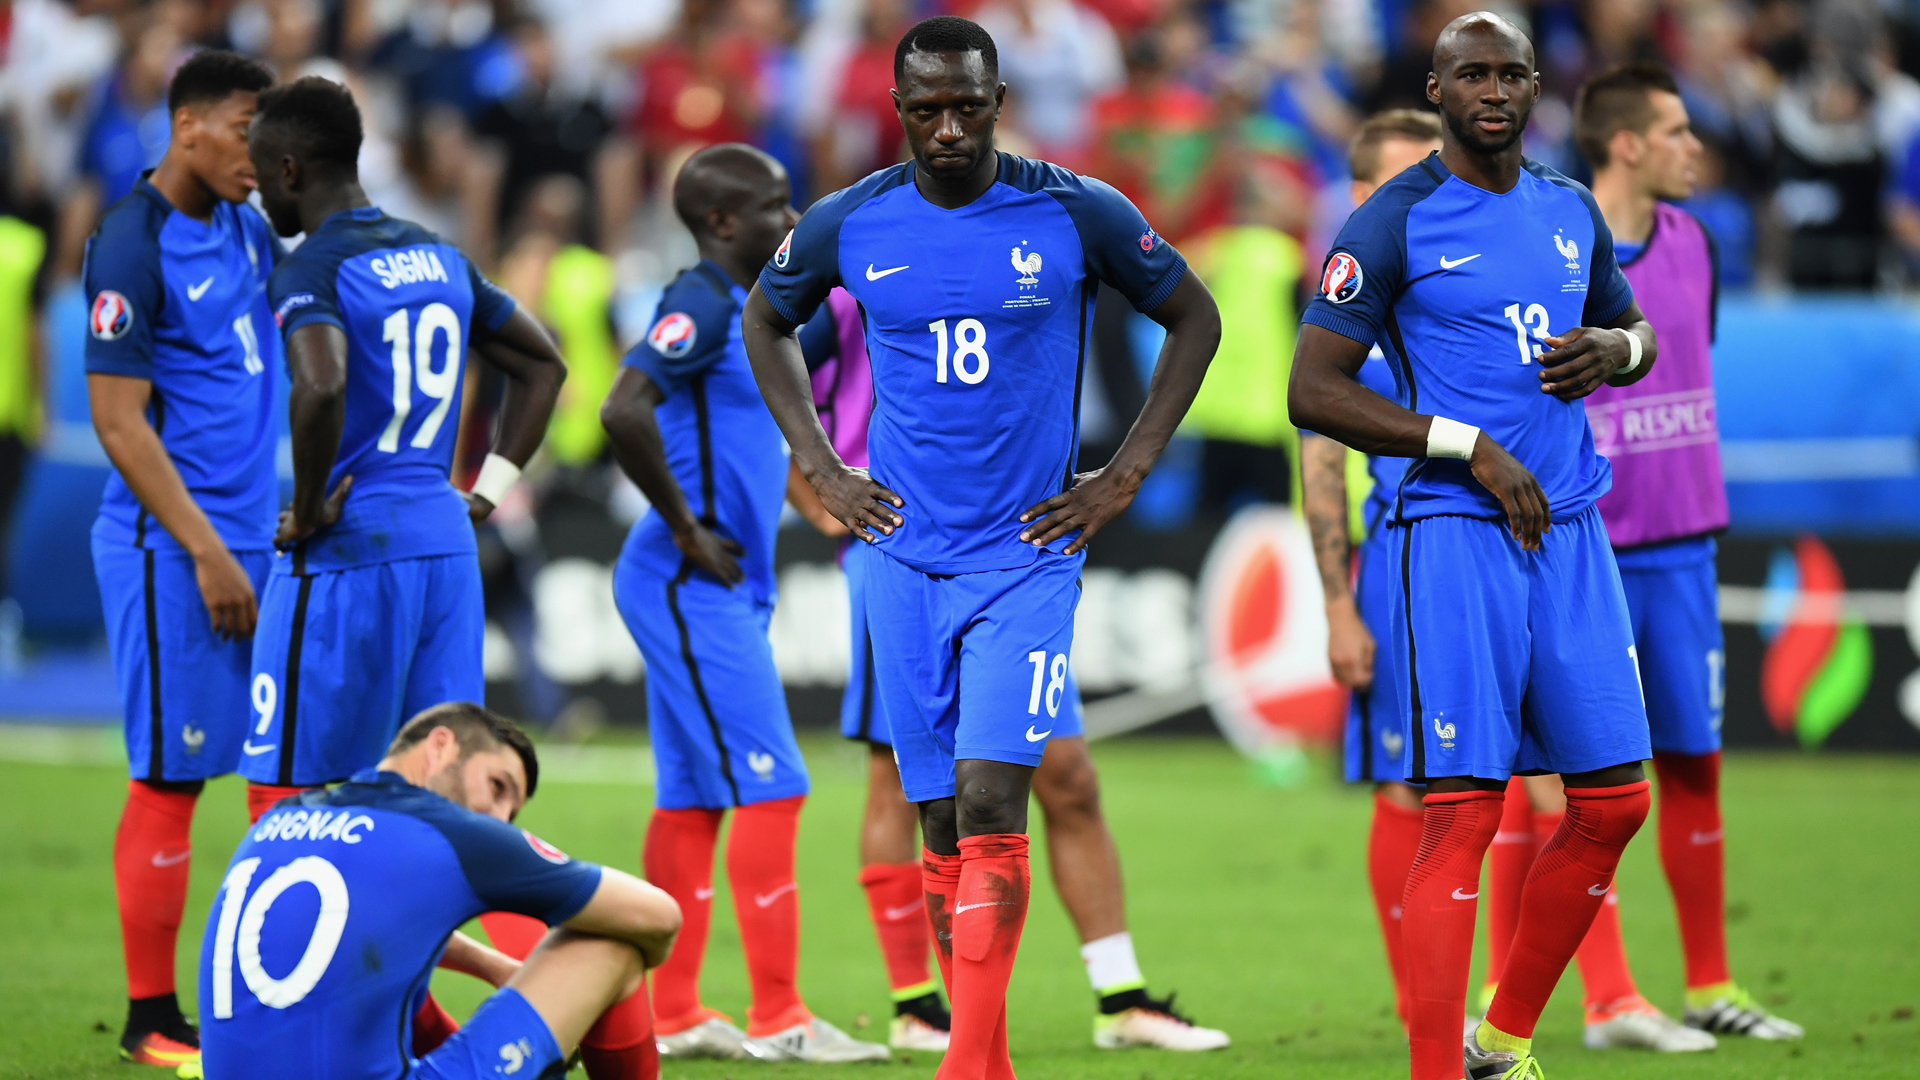 France End Euro 2016 On Disappointing Note But Future Remains Bright